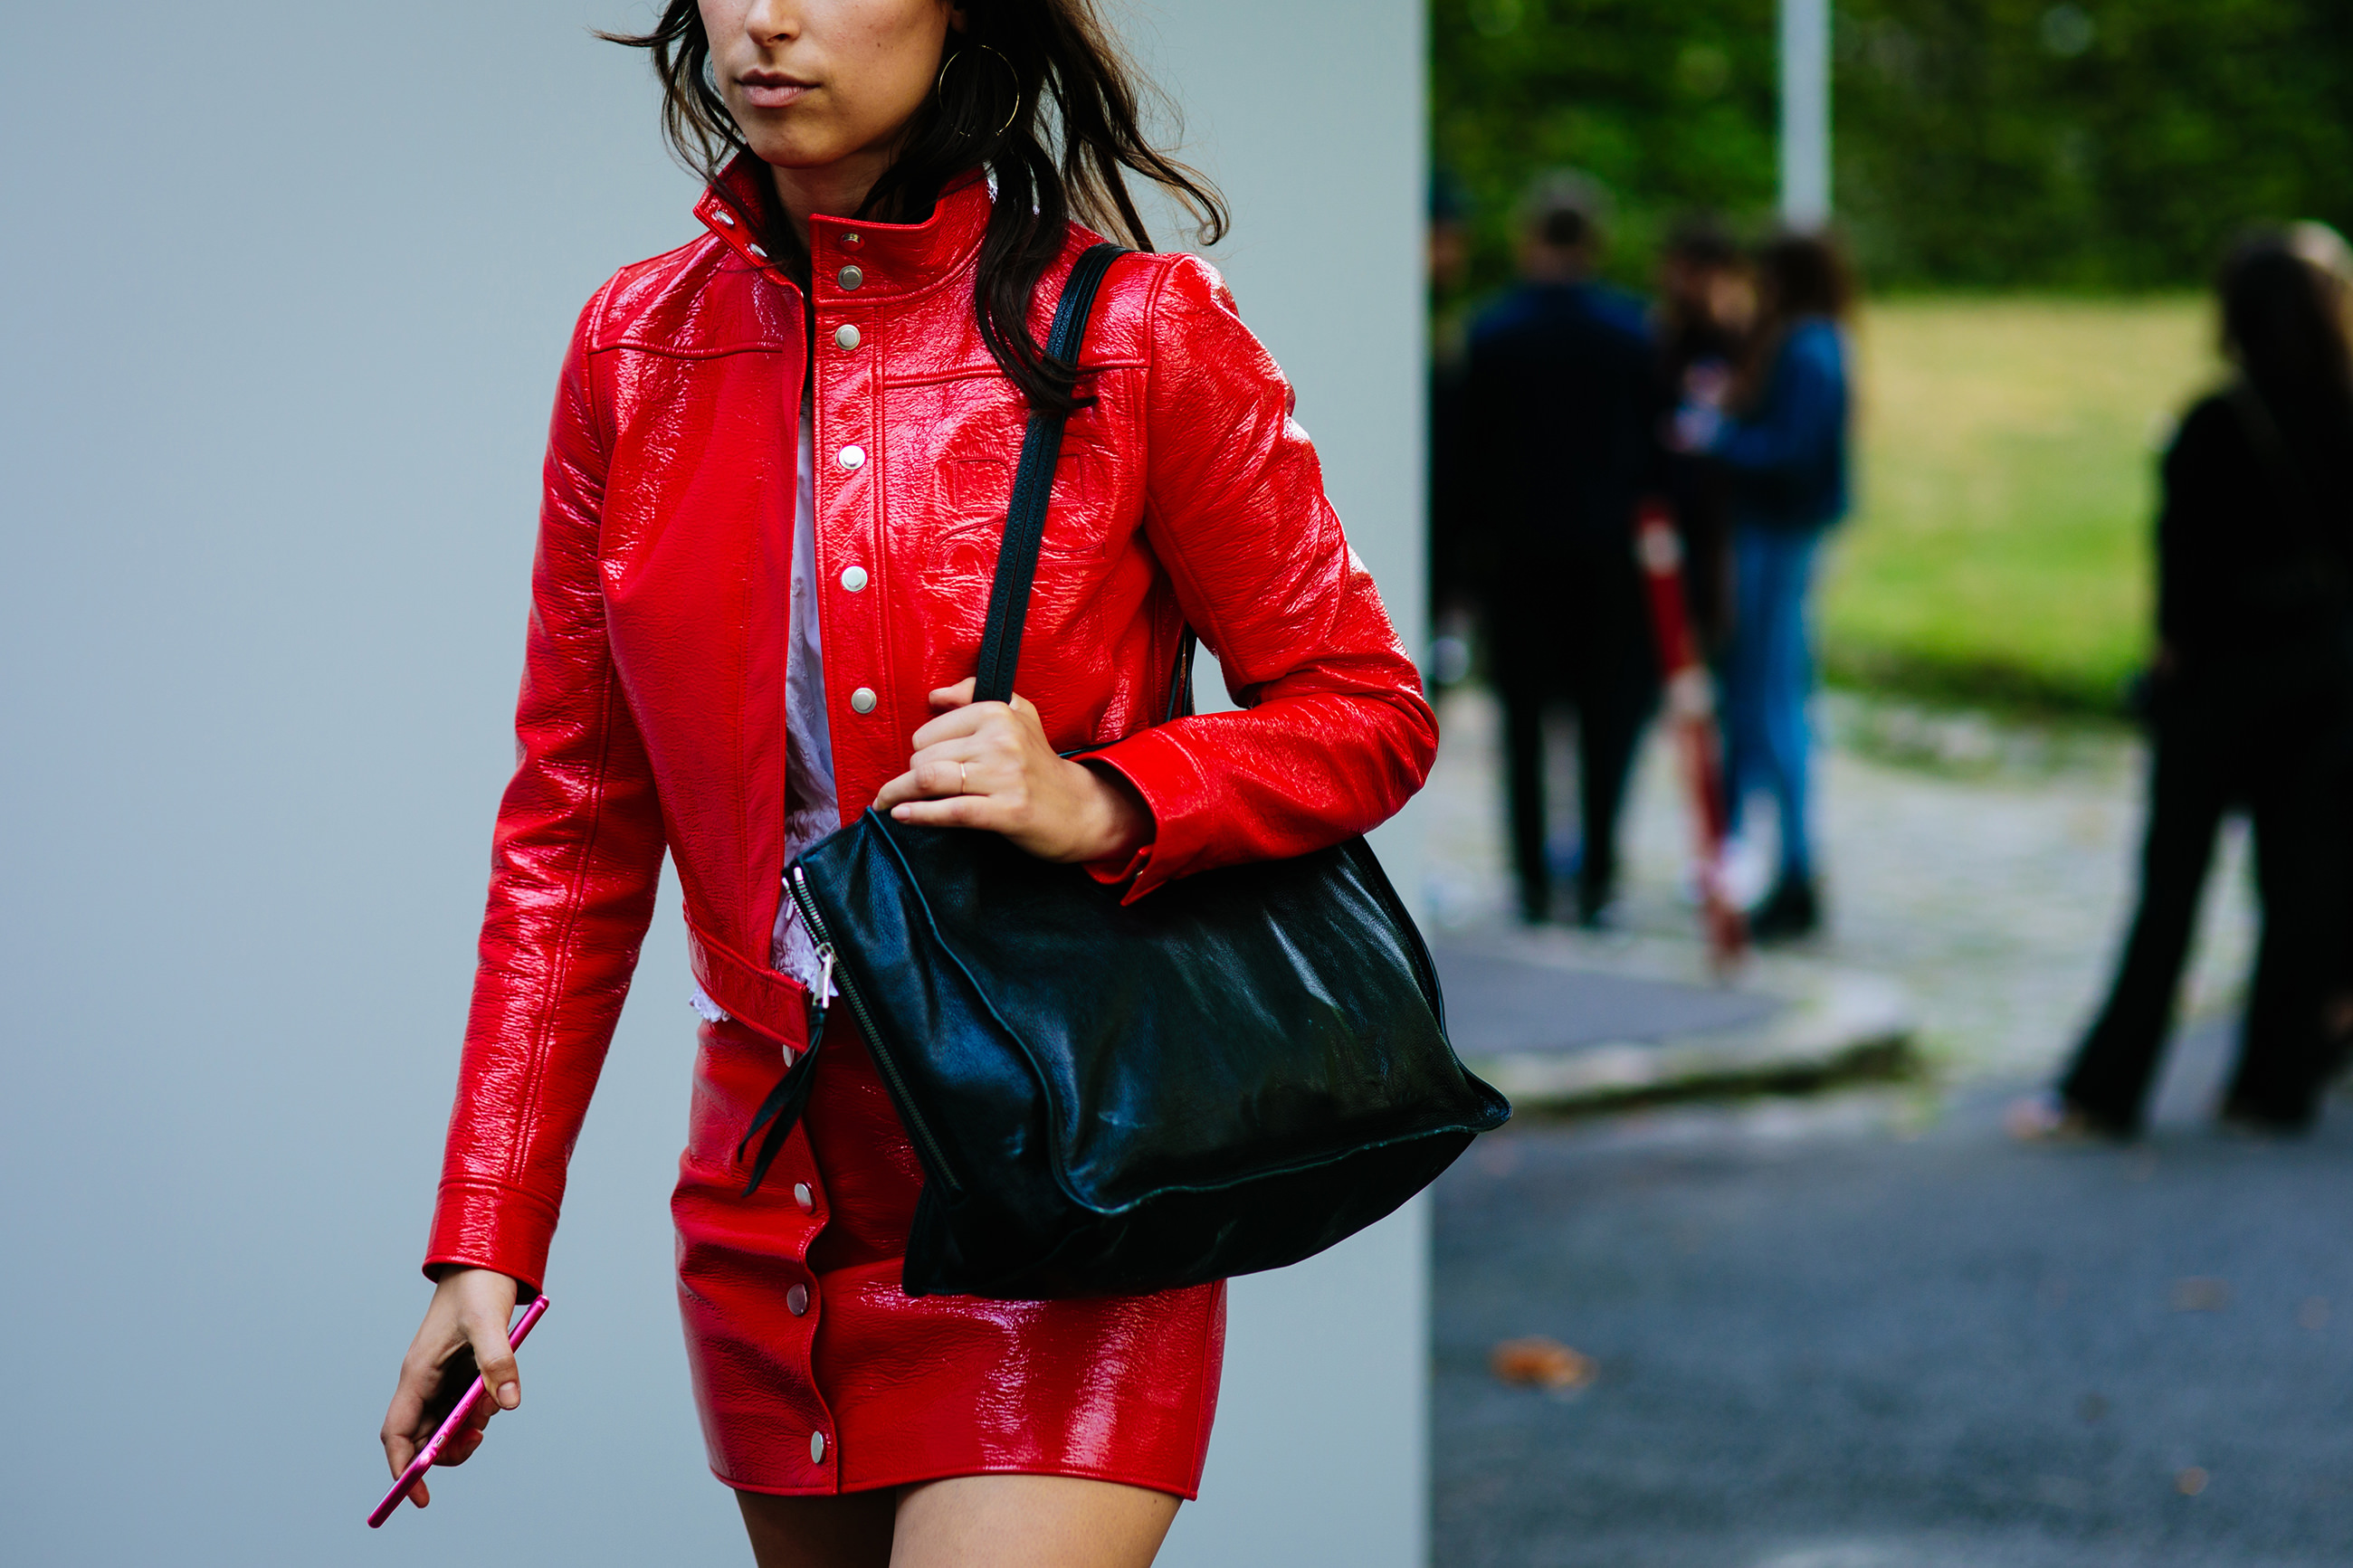 Woman wearing a Courreges red patent outfit after the Rodarte SS18 fashion show in Paris, France